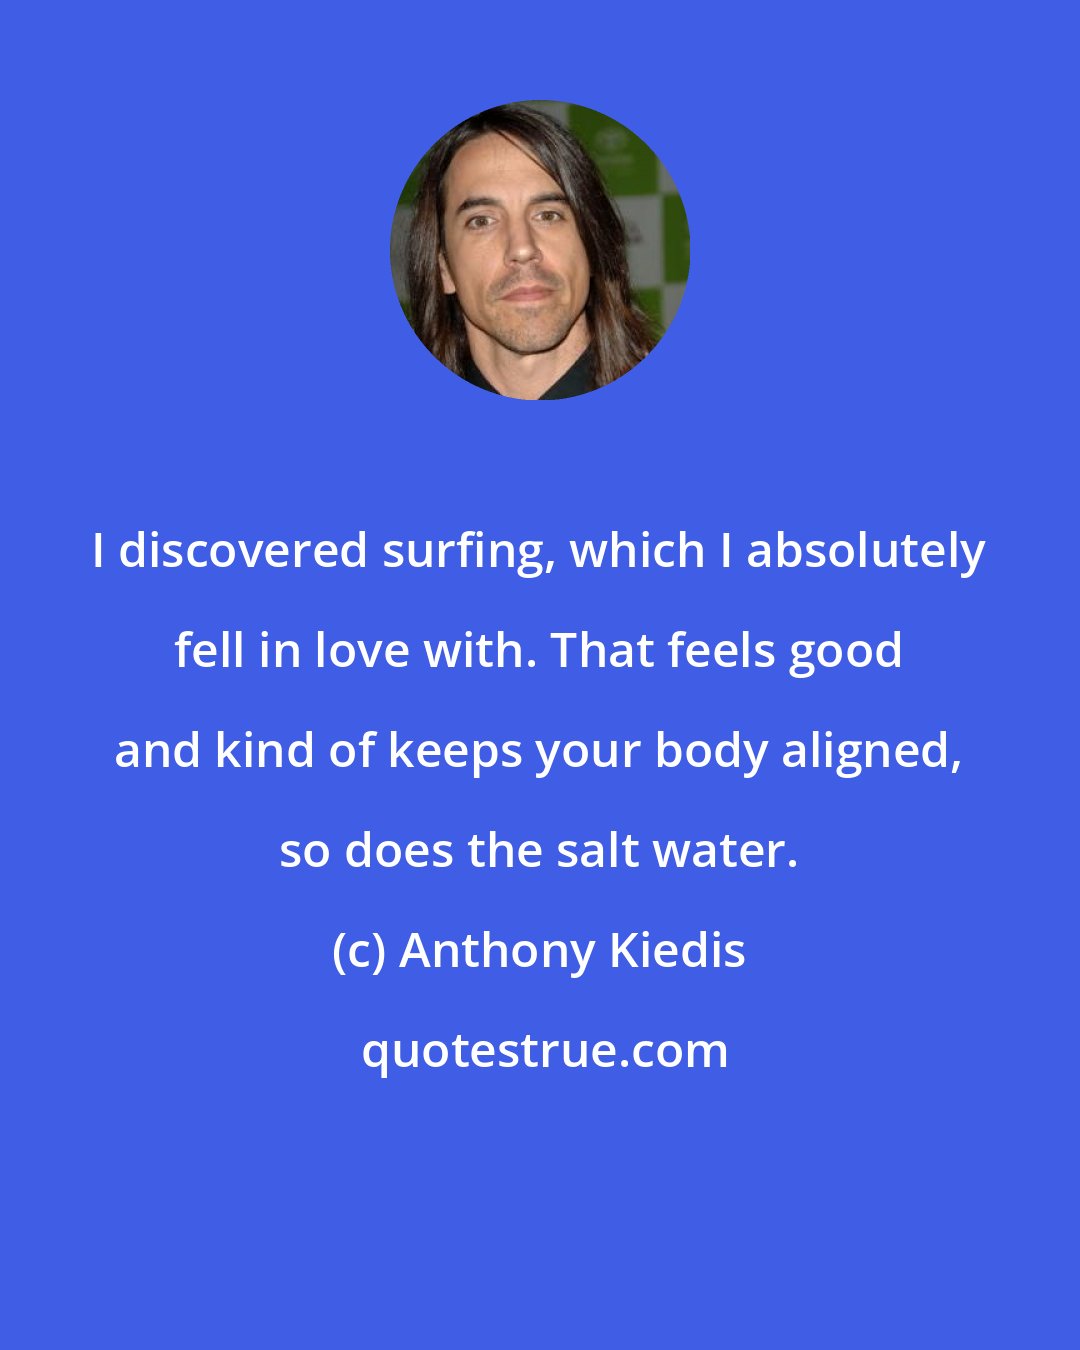 Anthony Kiedis: I discovered surfing, which I absolutely fell in love with. That feels good and kind of keeps your body aligned, so does the salt water.